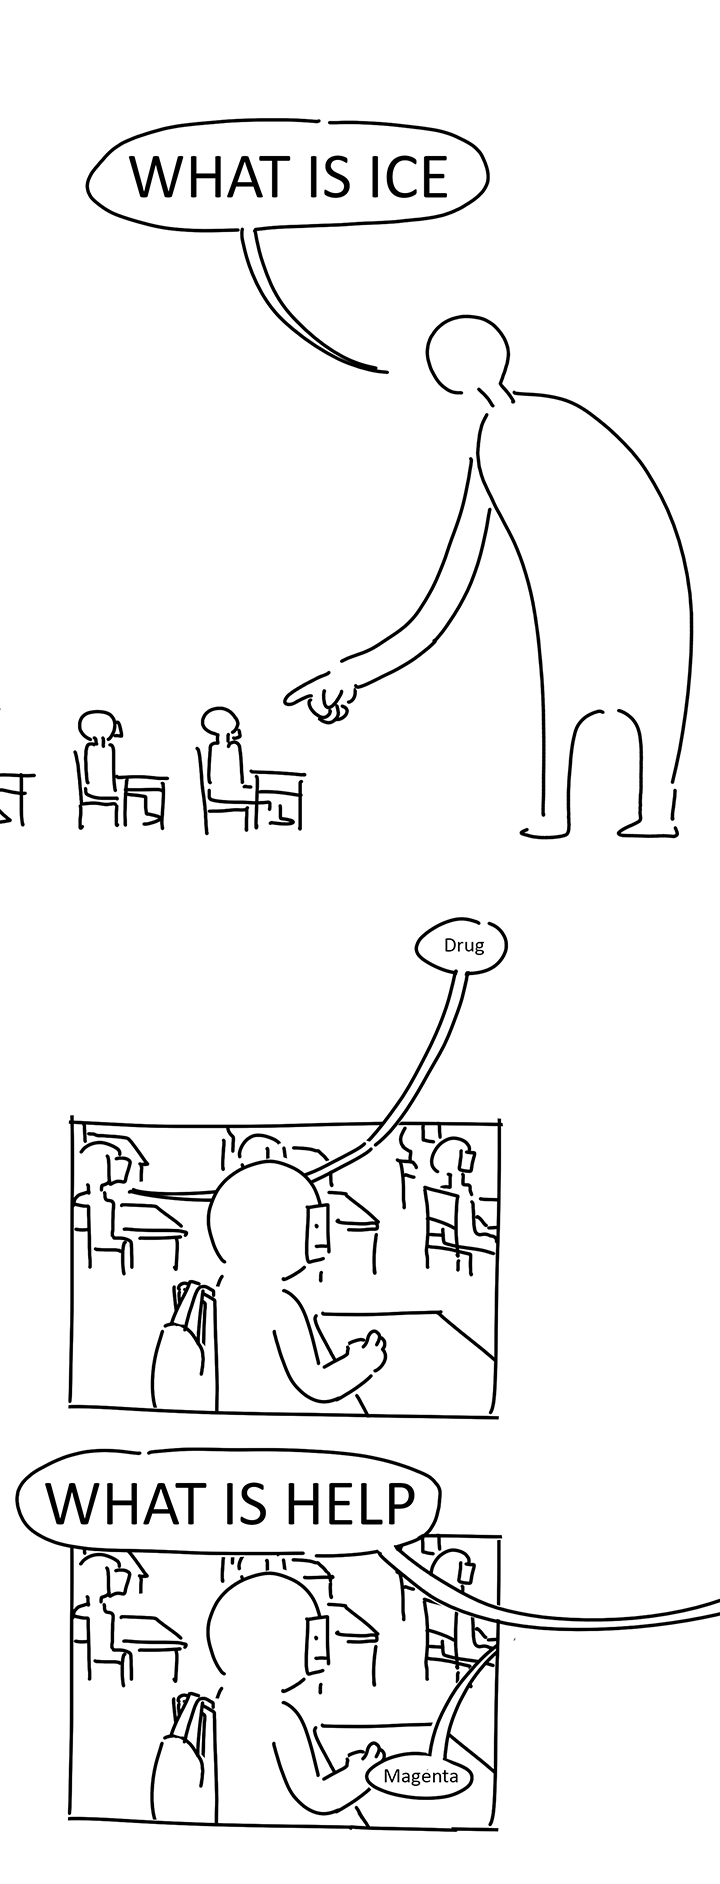 Panel 9: A giant silhouette looms over the small ones, reaching a long arm and pointing at one of the silhouettes. They say, "WHAT IS ICE" in large lettering. Panel 10: One of the silhouettes in the next row over from the kid says, "Drug." The kid is sitting at their desk with a hand on their desk, not moving and facing forward. Panel 11: The kid continues to sit without moving. The teacher from somewhere off the page says, "WHAT IS HELP" in large lettering. Someone in front of the kid but unseen says, "Magenta."